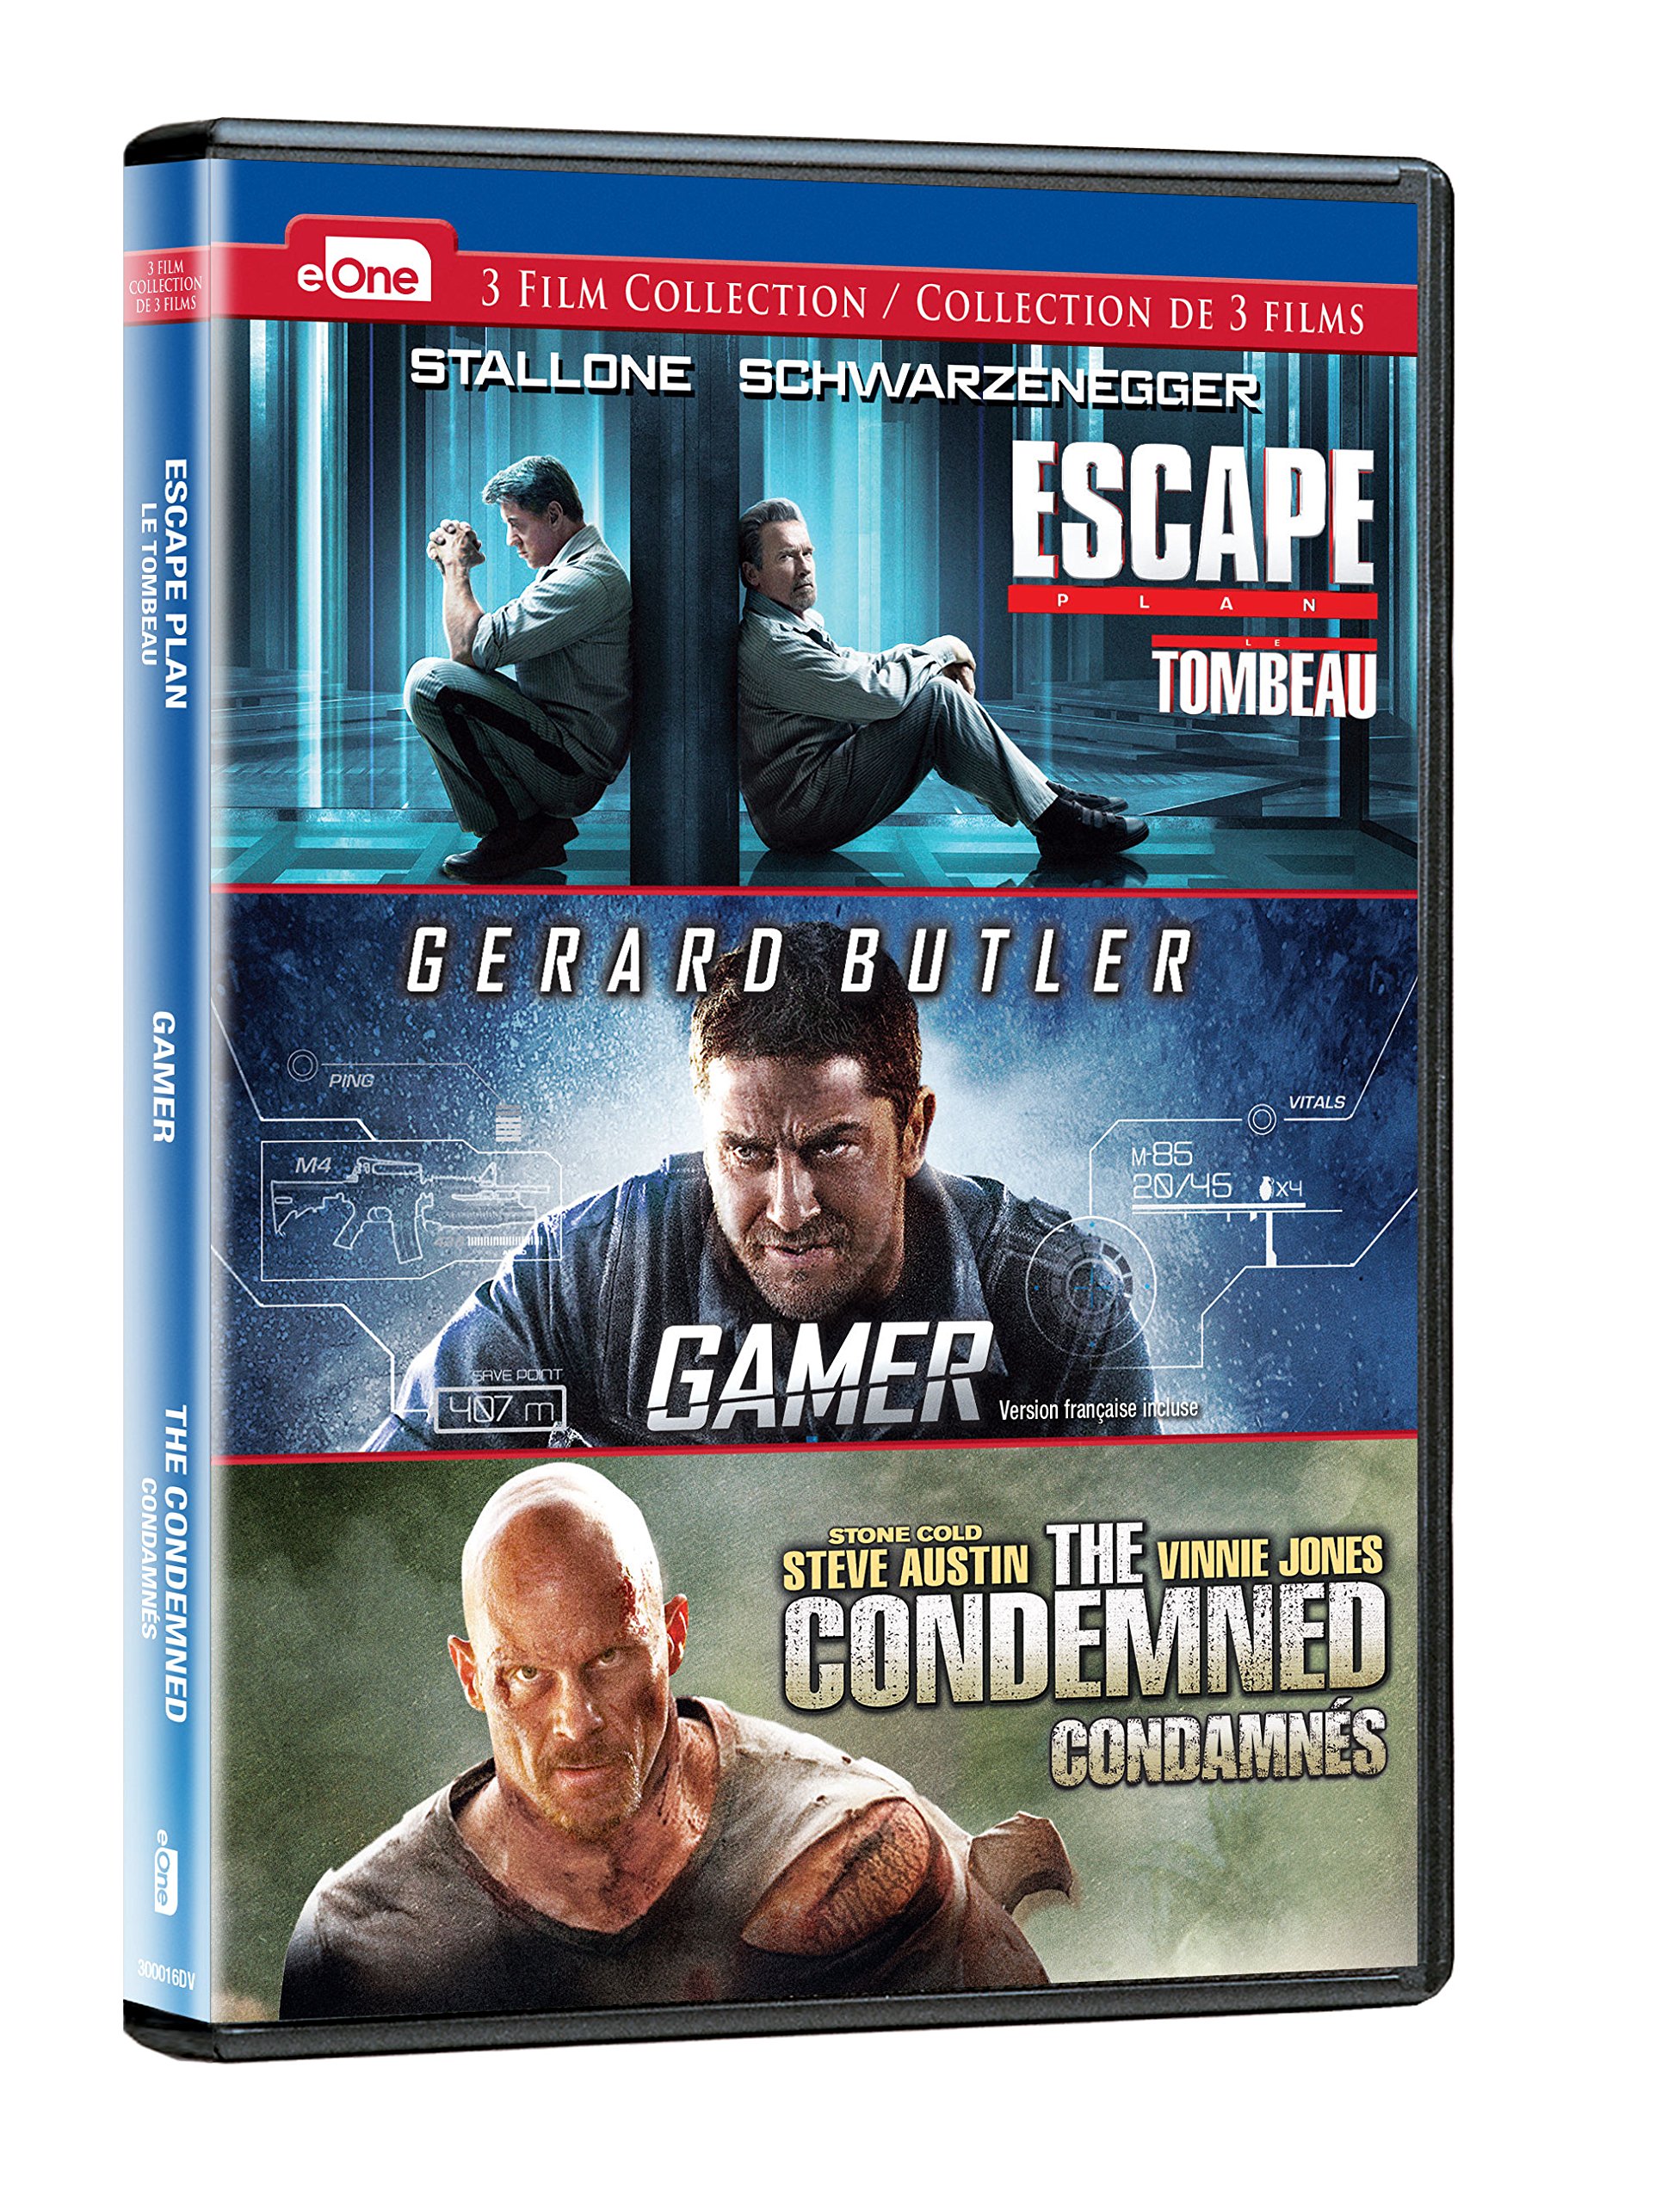 Escape Plan / / Gamer / / The Condemned DVD Triple Feature on MovieShack